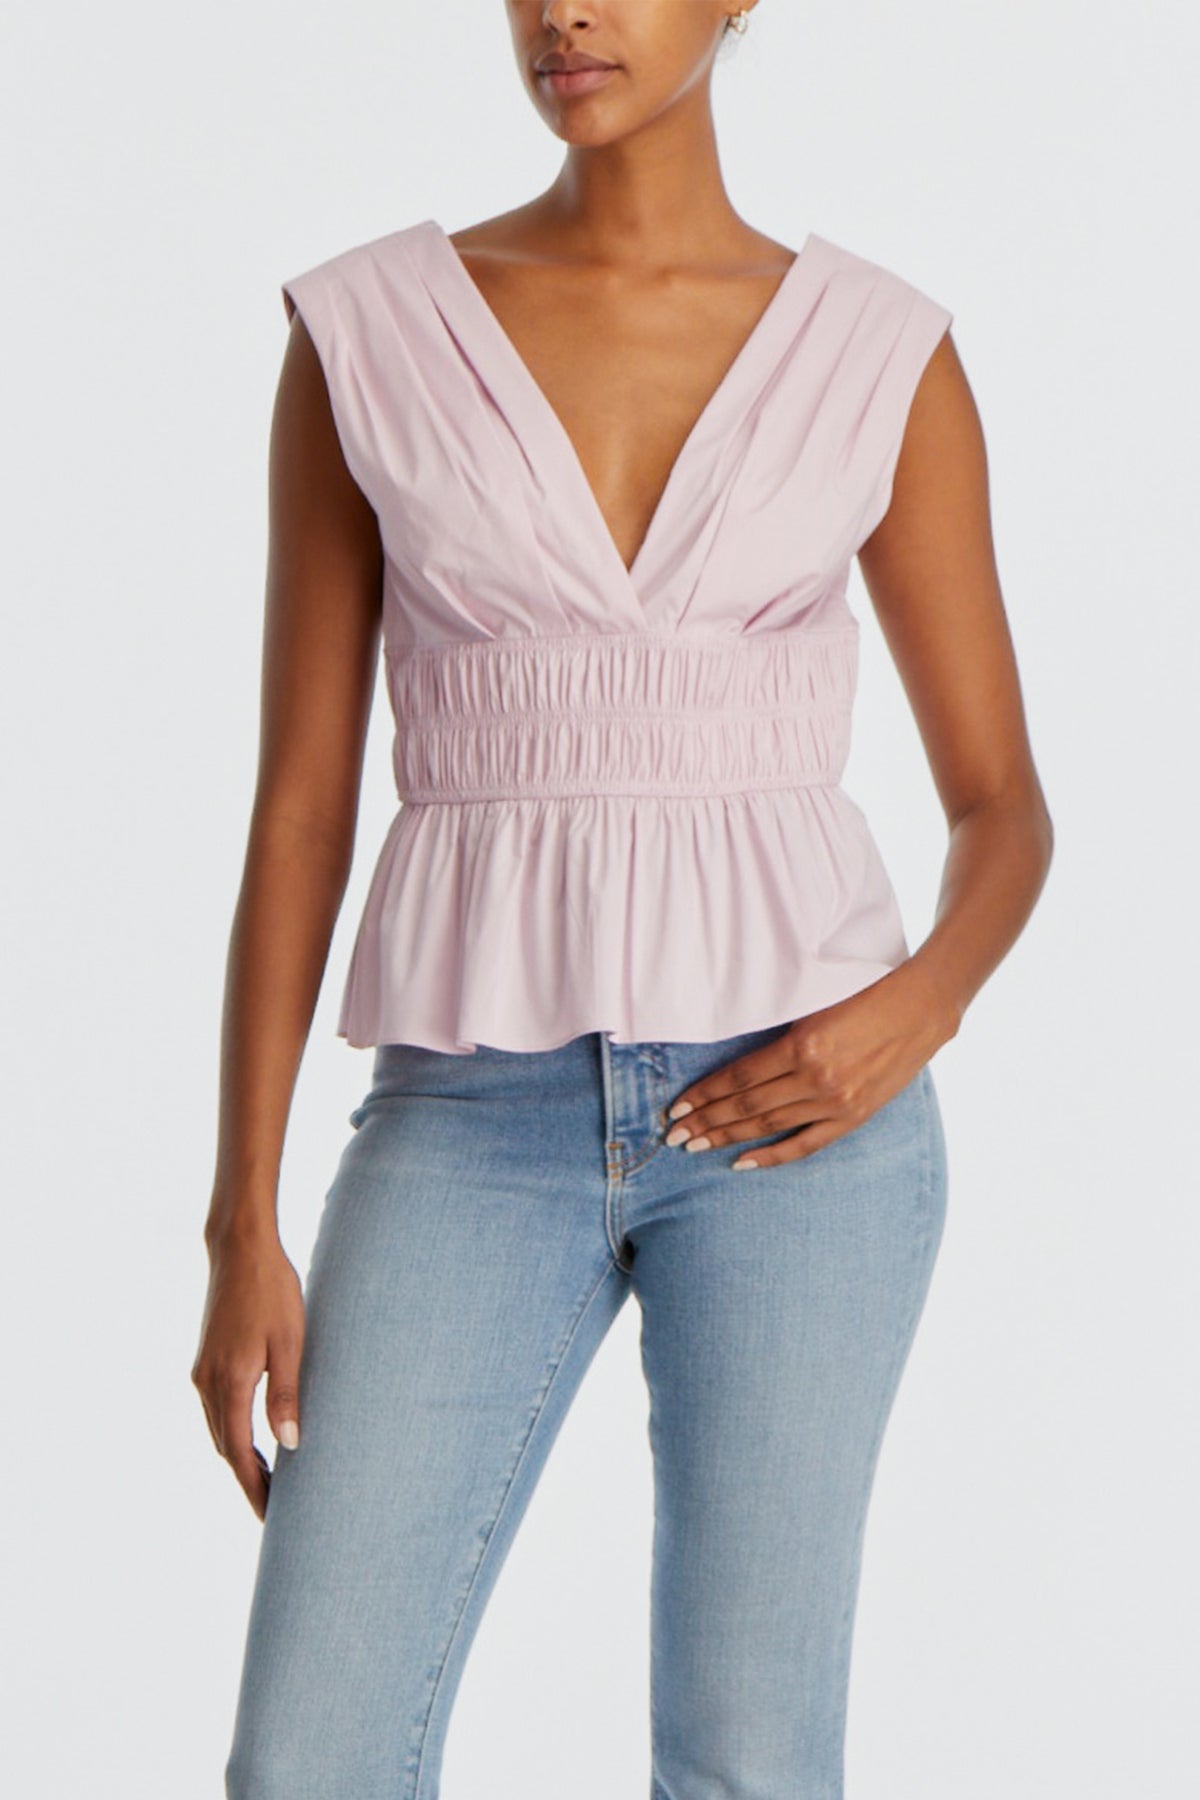 Evra Peplum Top in Barely Orchid - shop-olivia.com